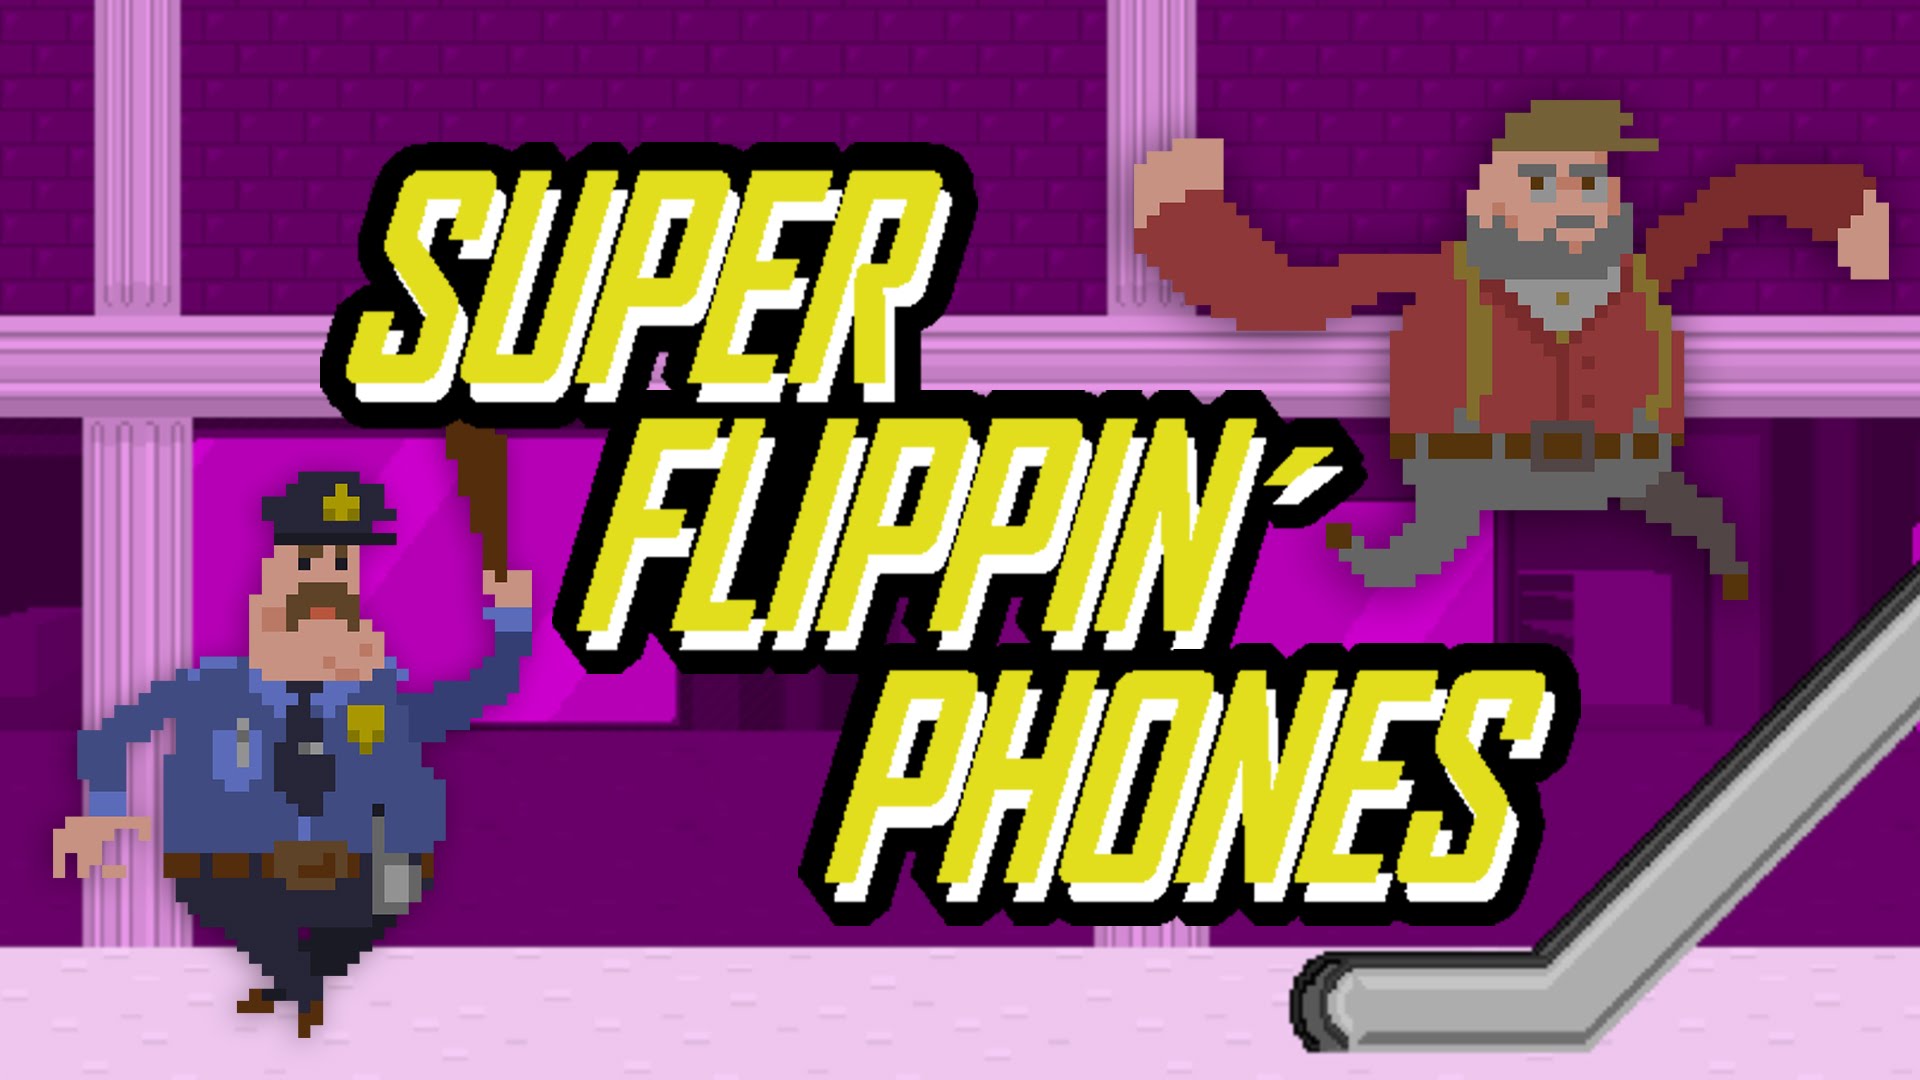 Super Flippin’ Phones Wants to Reduce Your Screen Time (with More Screen Time)